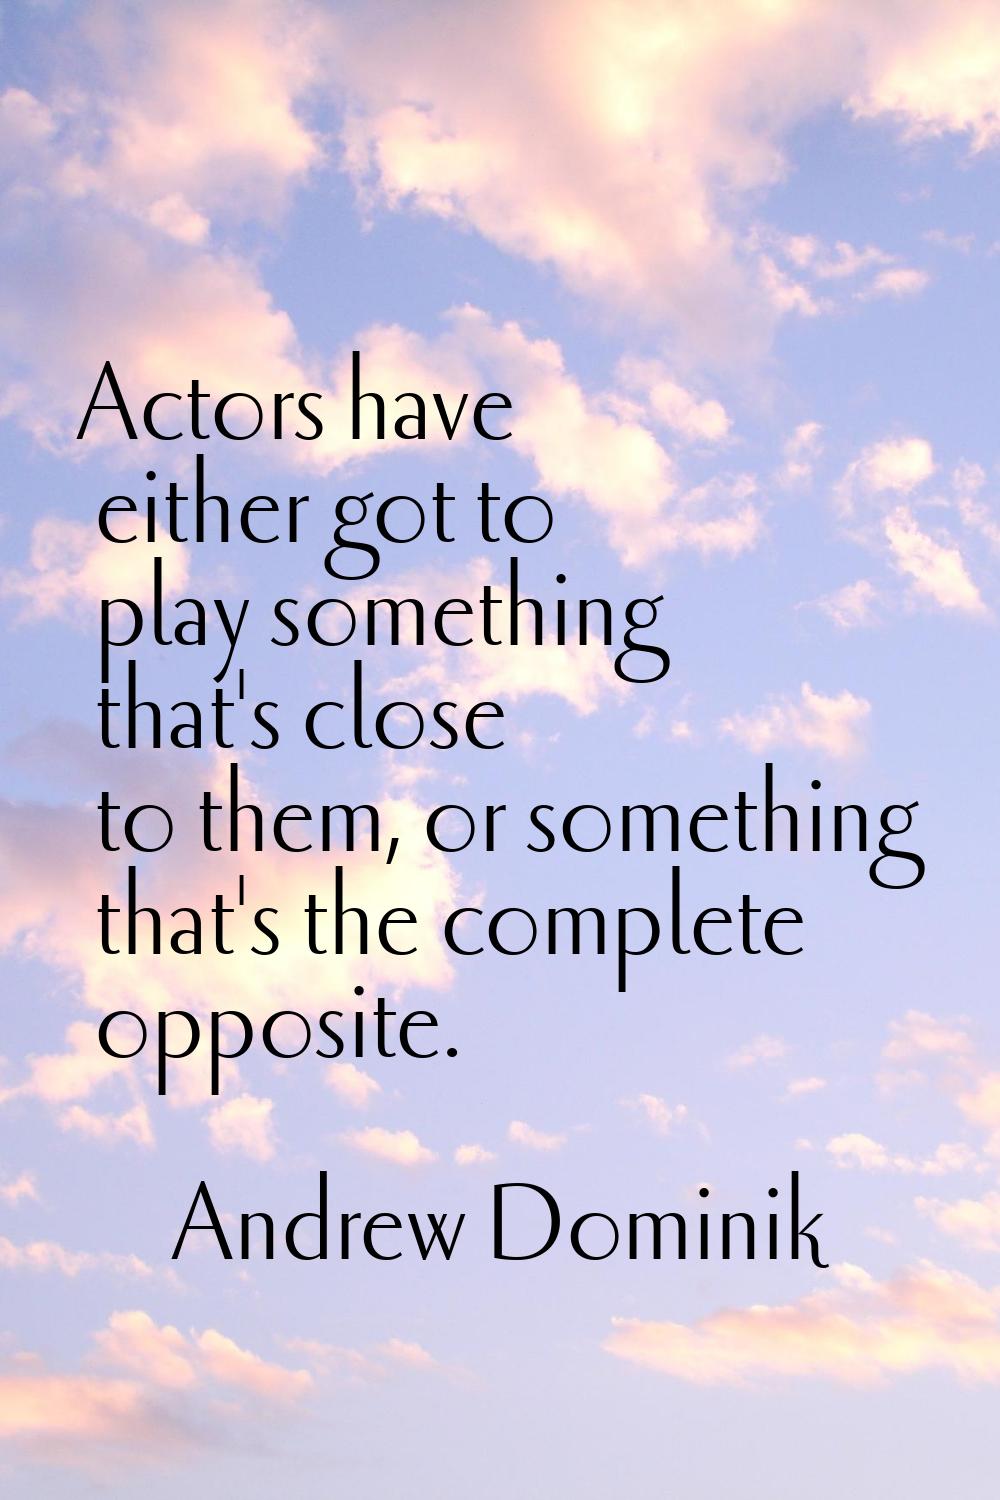 Actors have either got to play something that's close to them, or something that's the complete opp